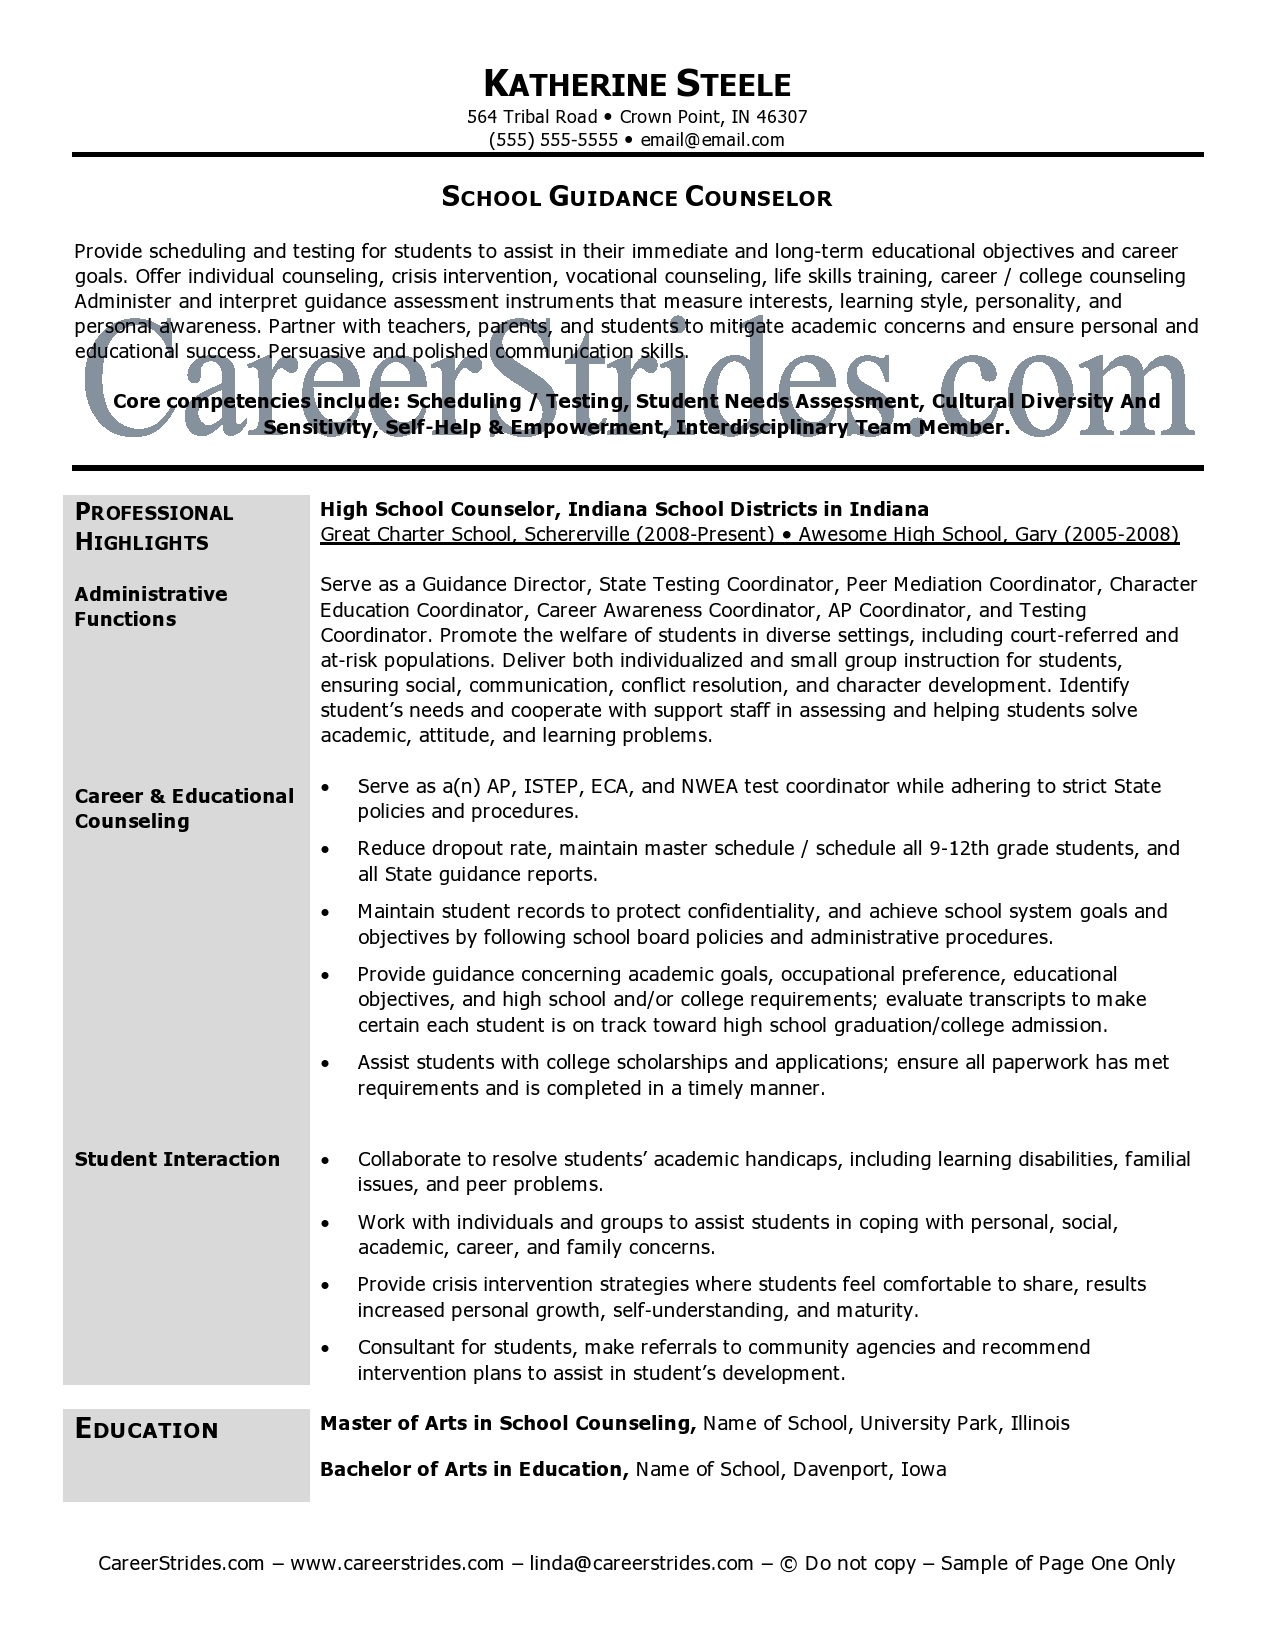 Essays on career counseling